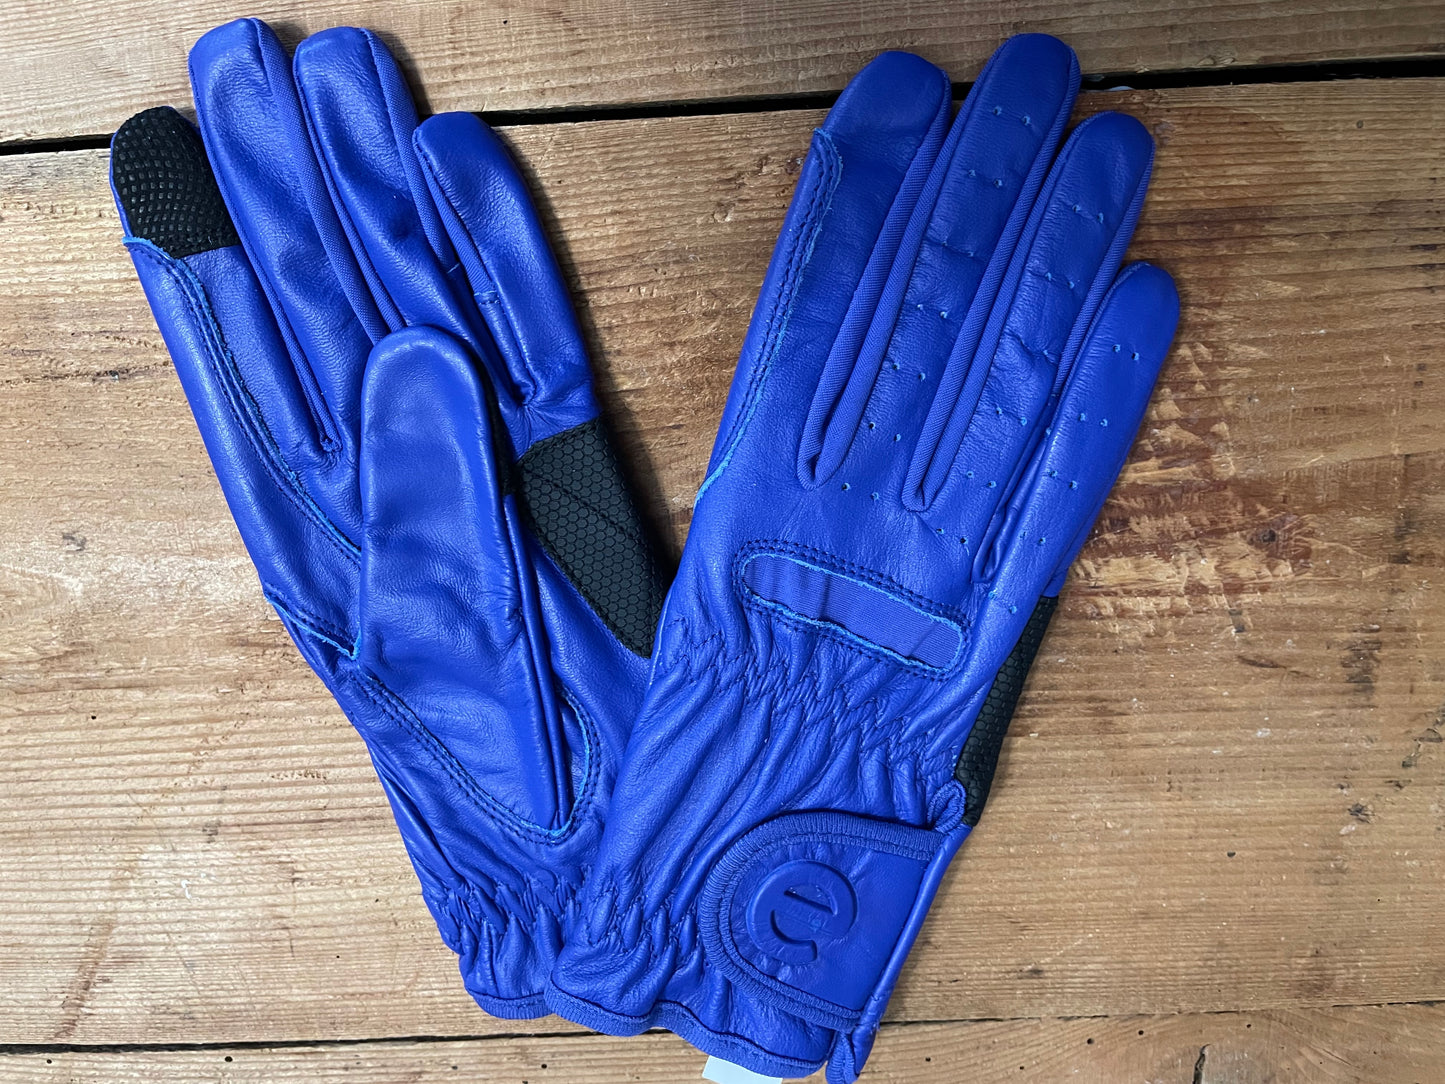 Gloves - eQuest Grip Pro Leather - Royal Blue